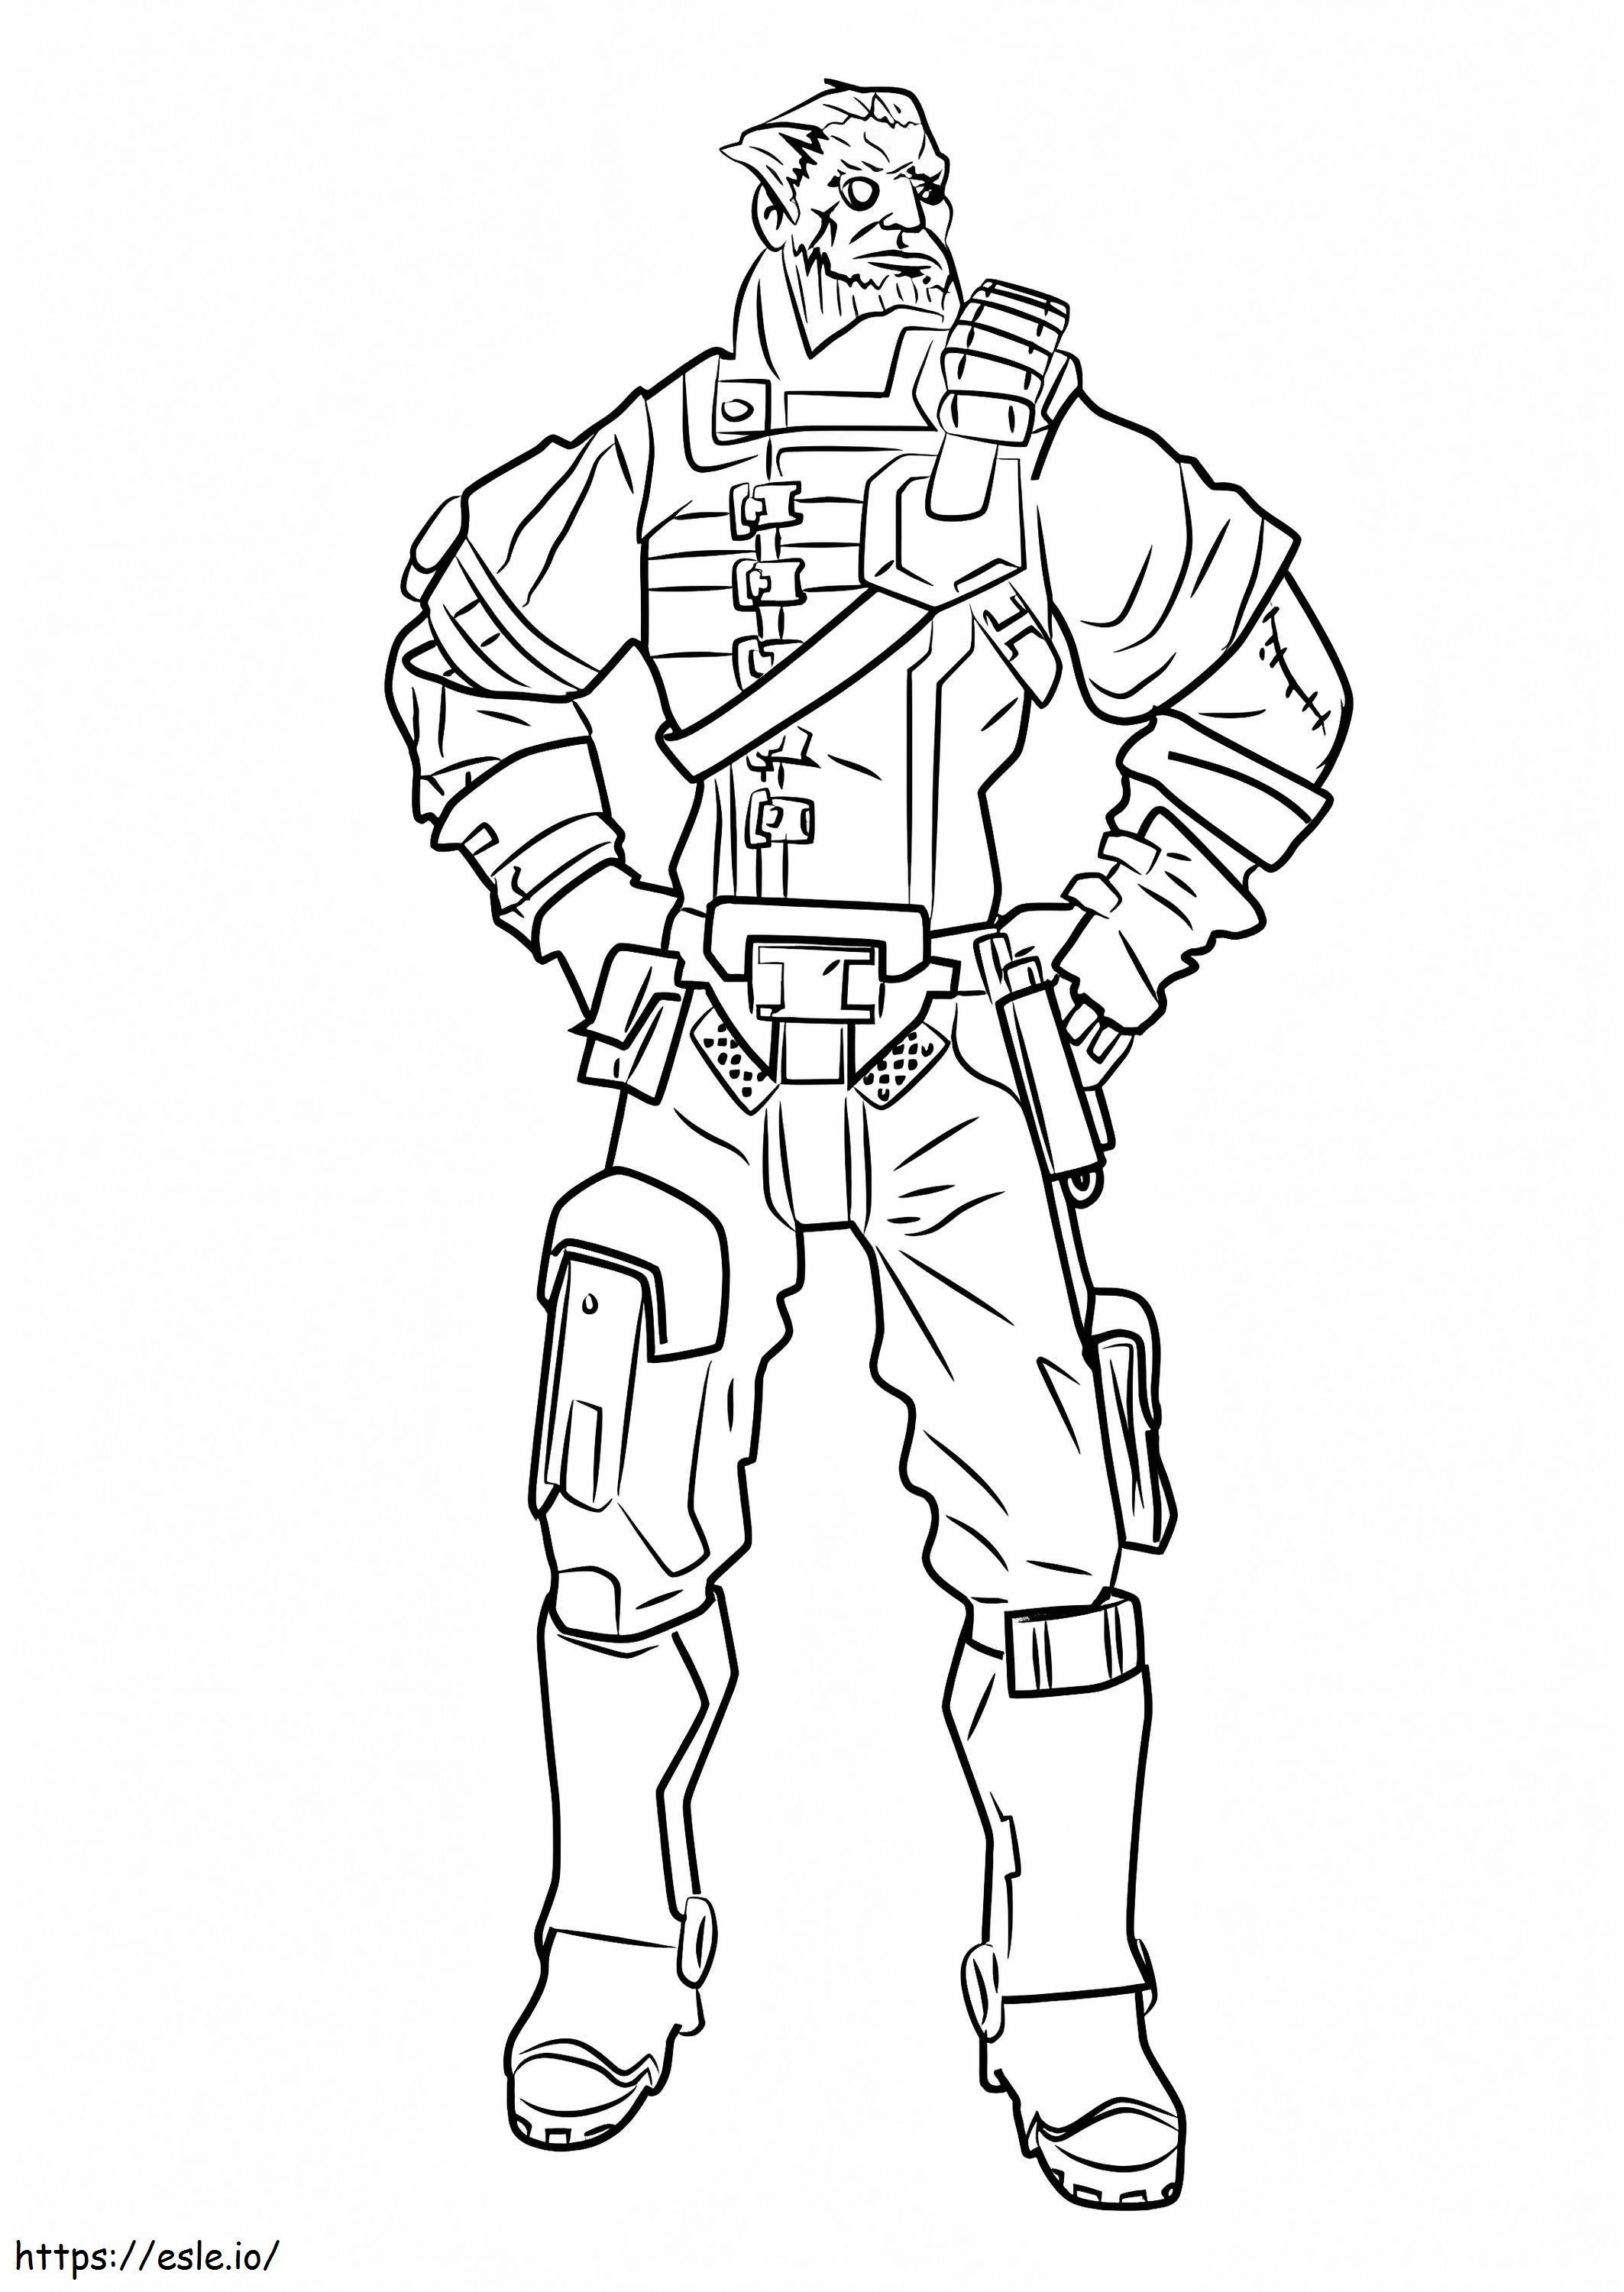 Wilhelm From Borderlands coloring page